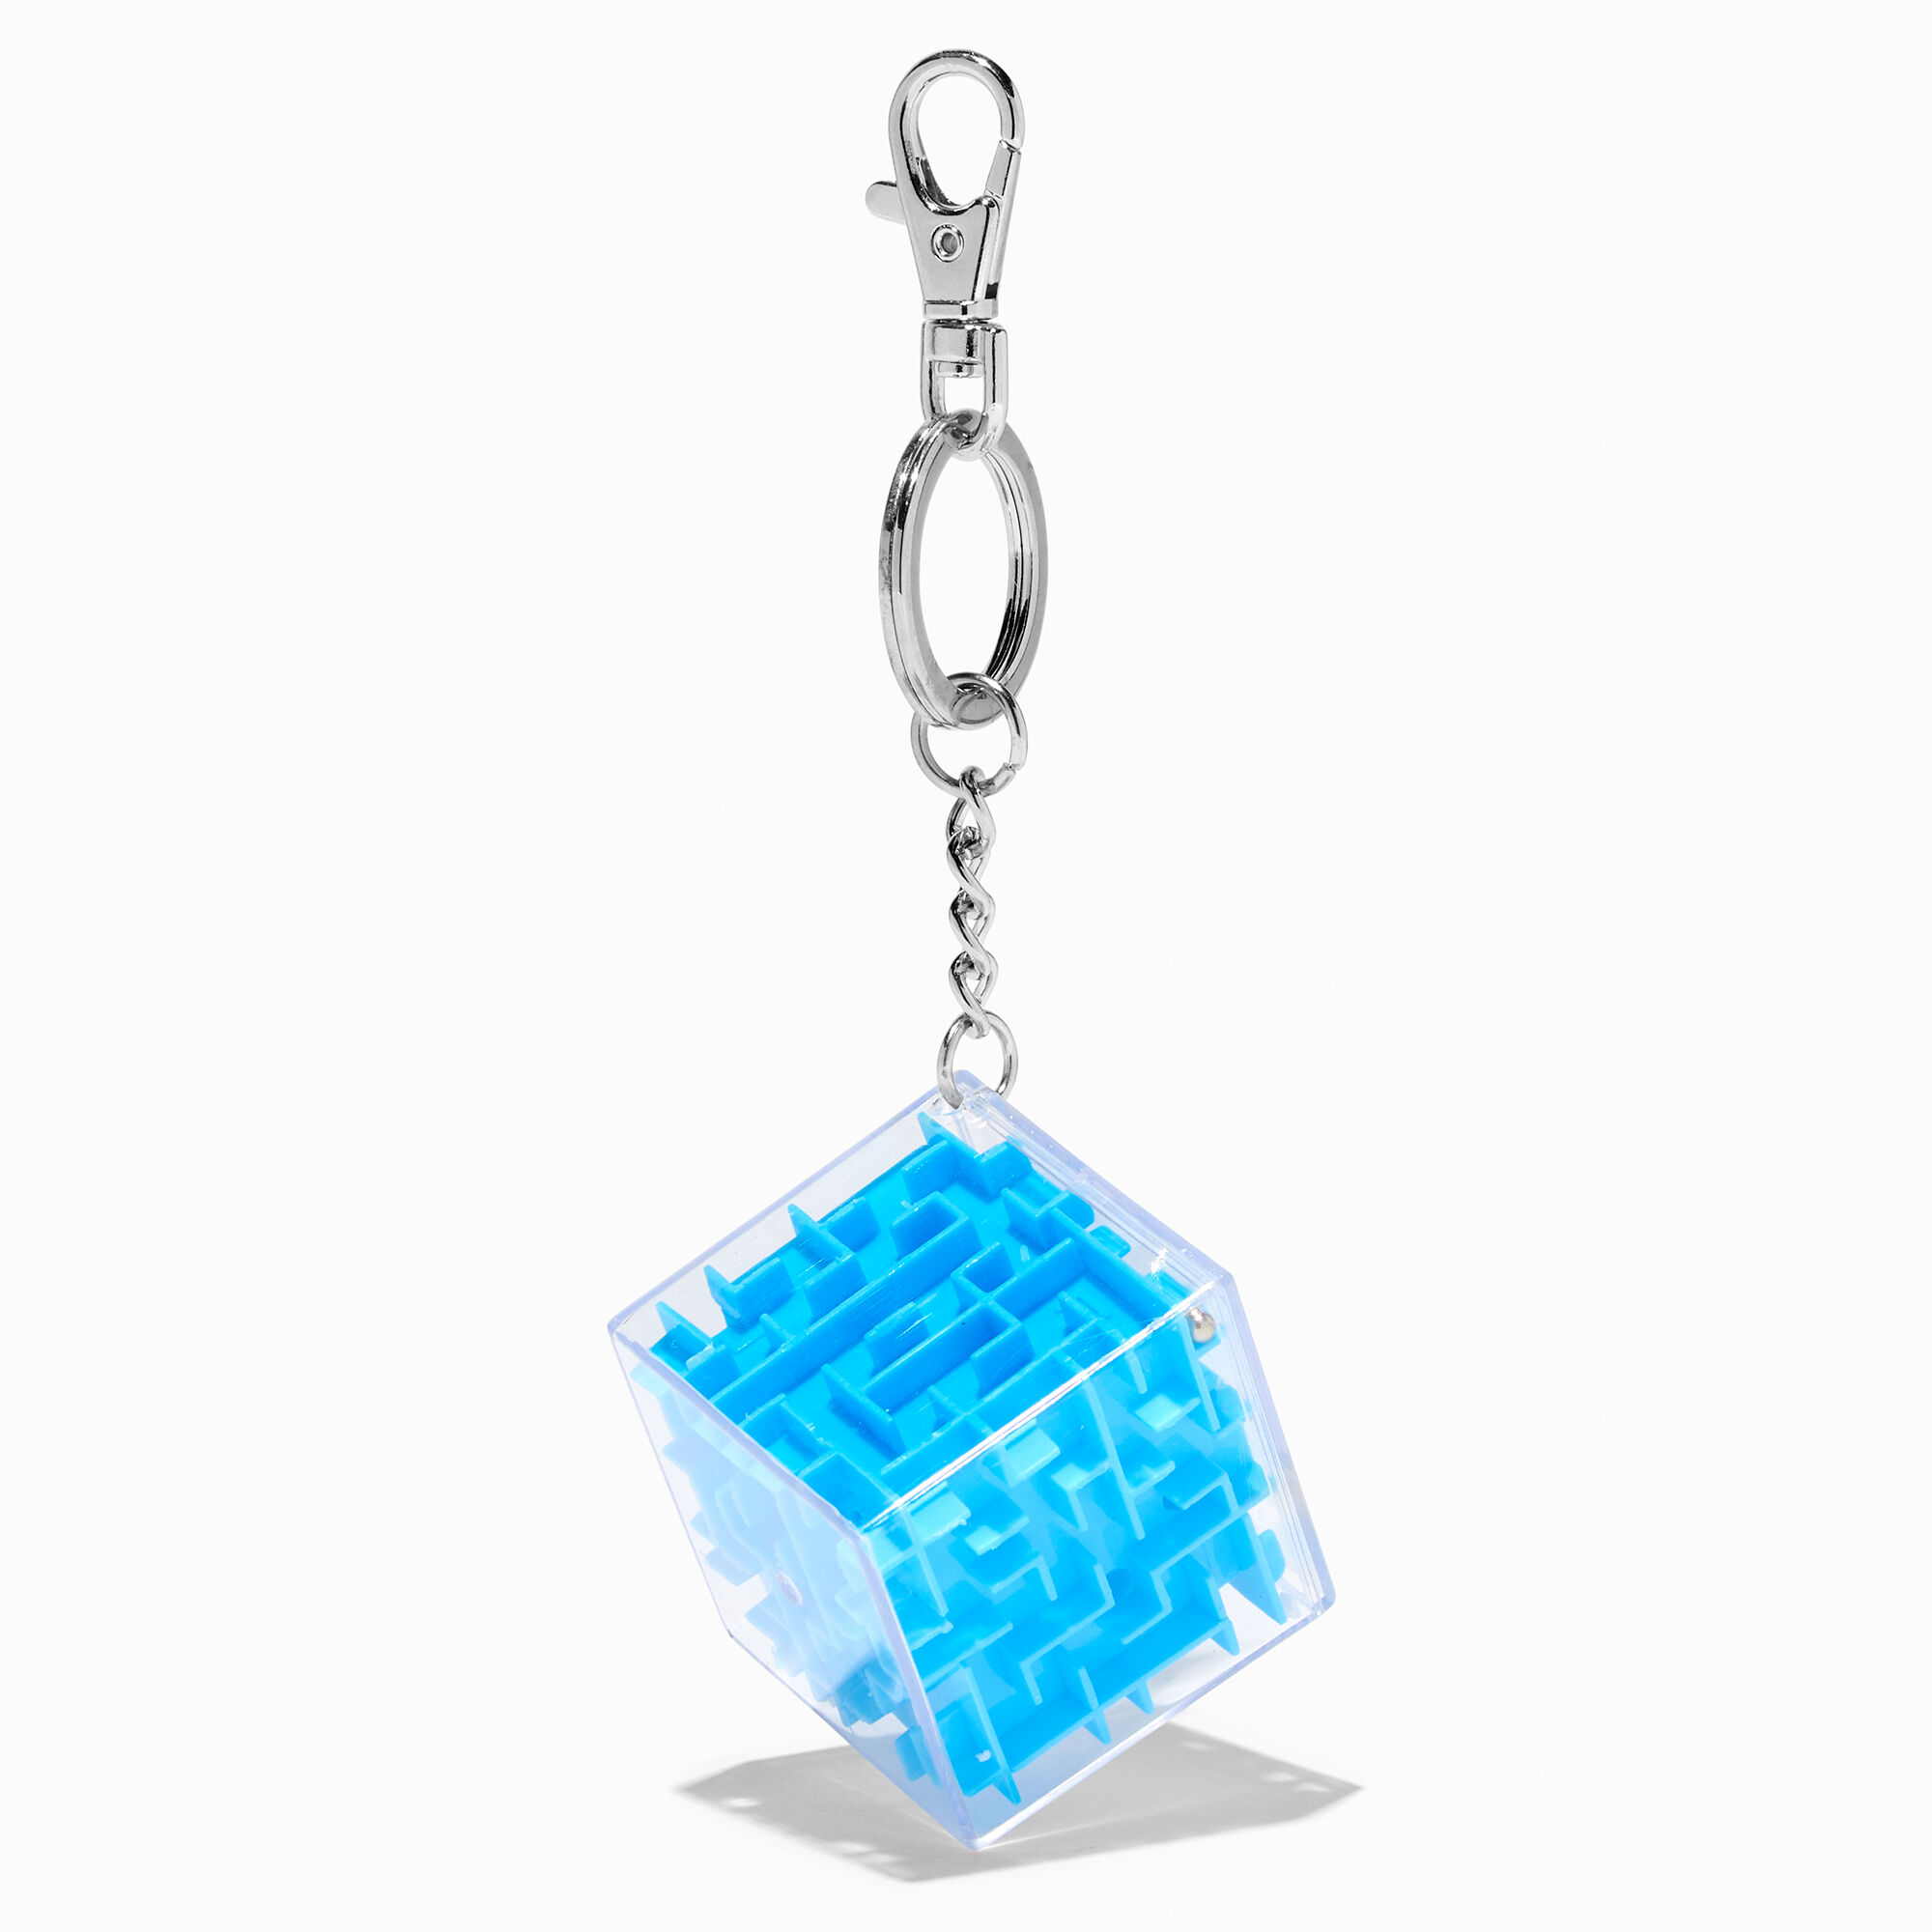 View Claires Maze Game Keyring Silver information